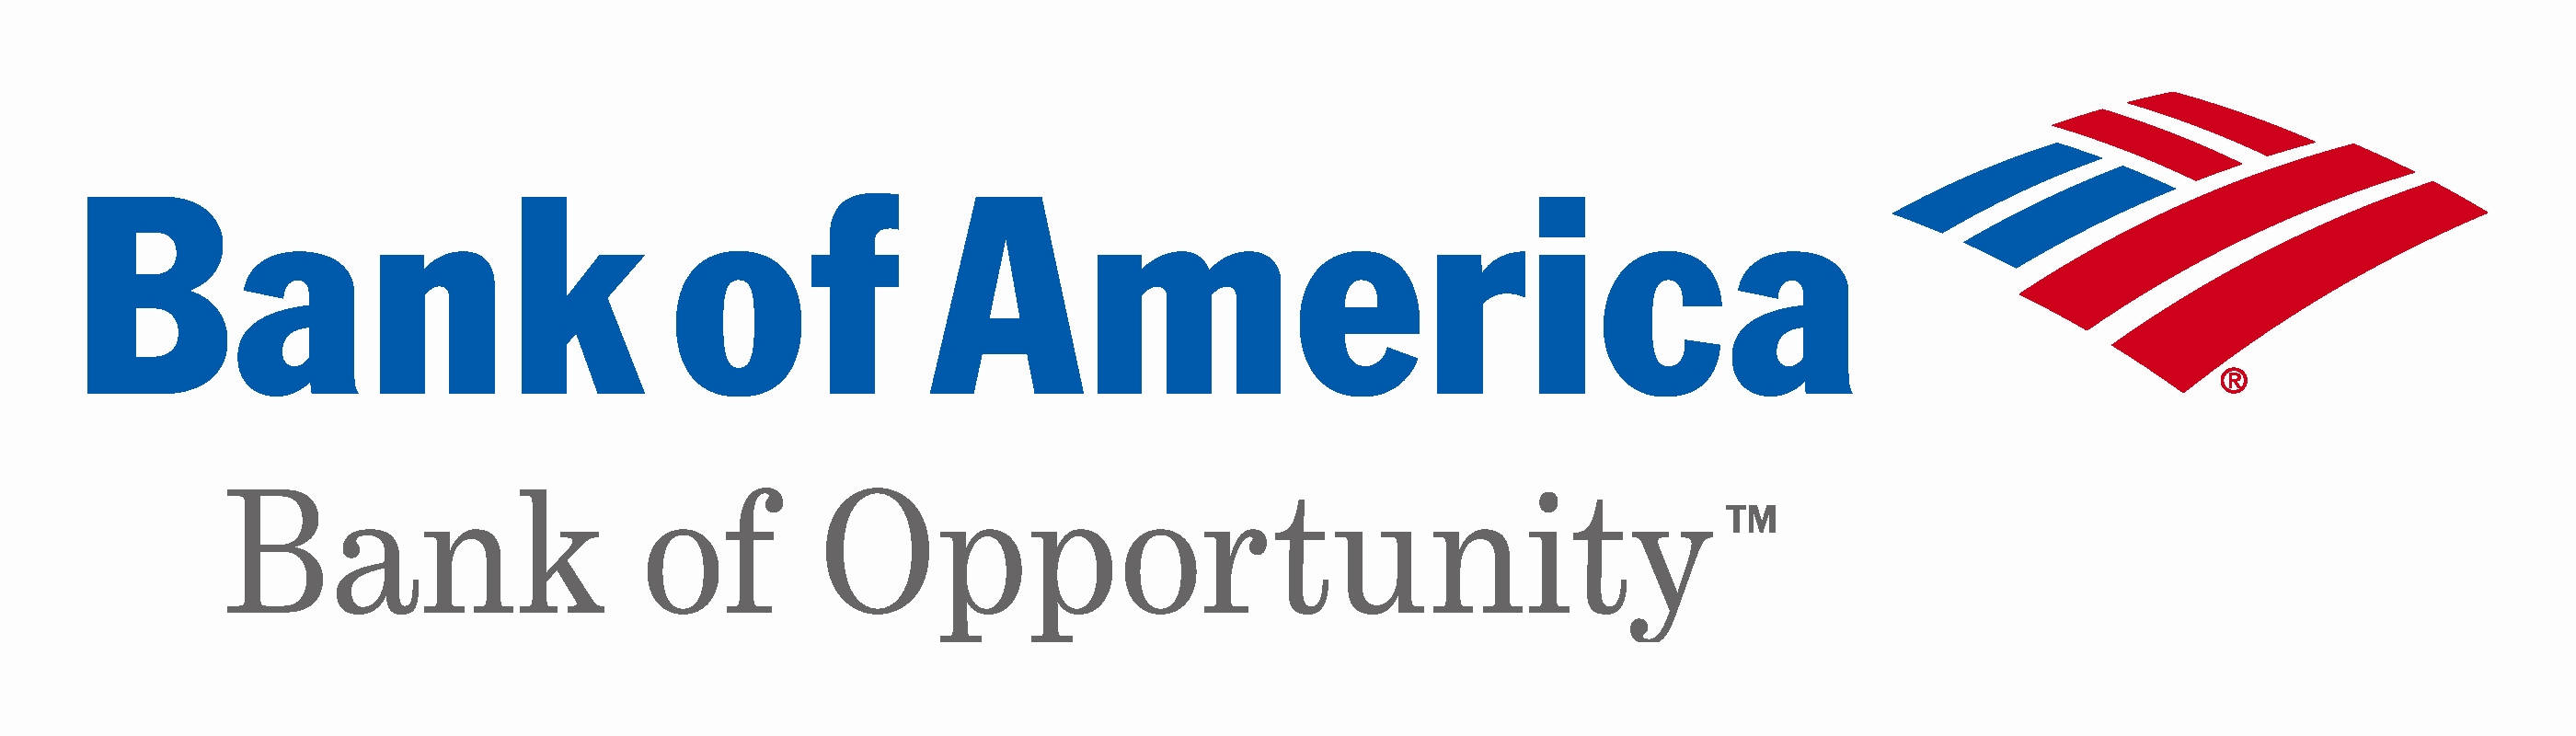 Bank Of America Bank Of Opportunity Wallpaper